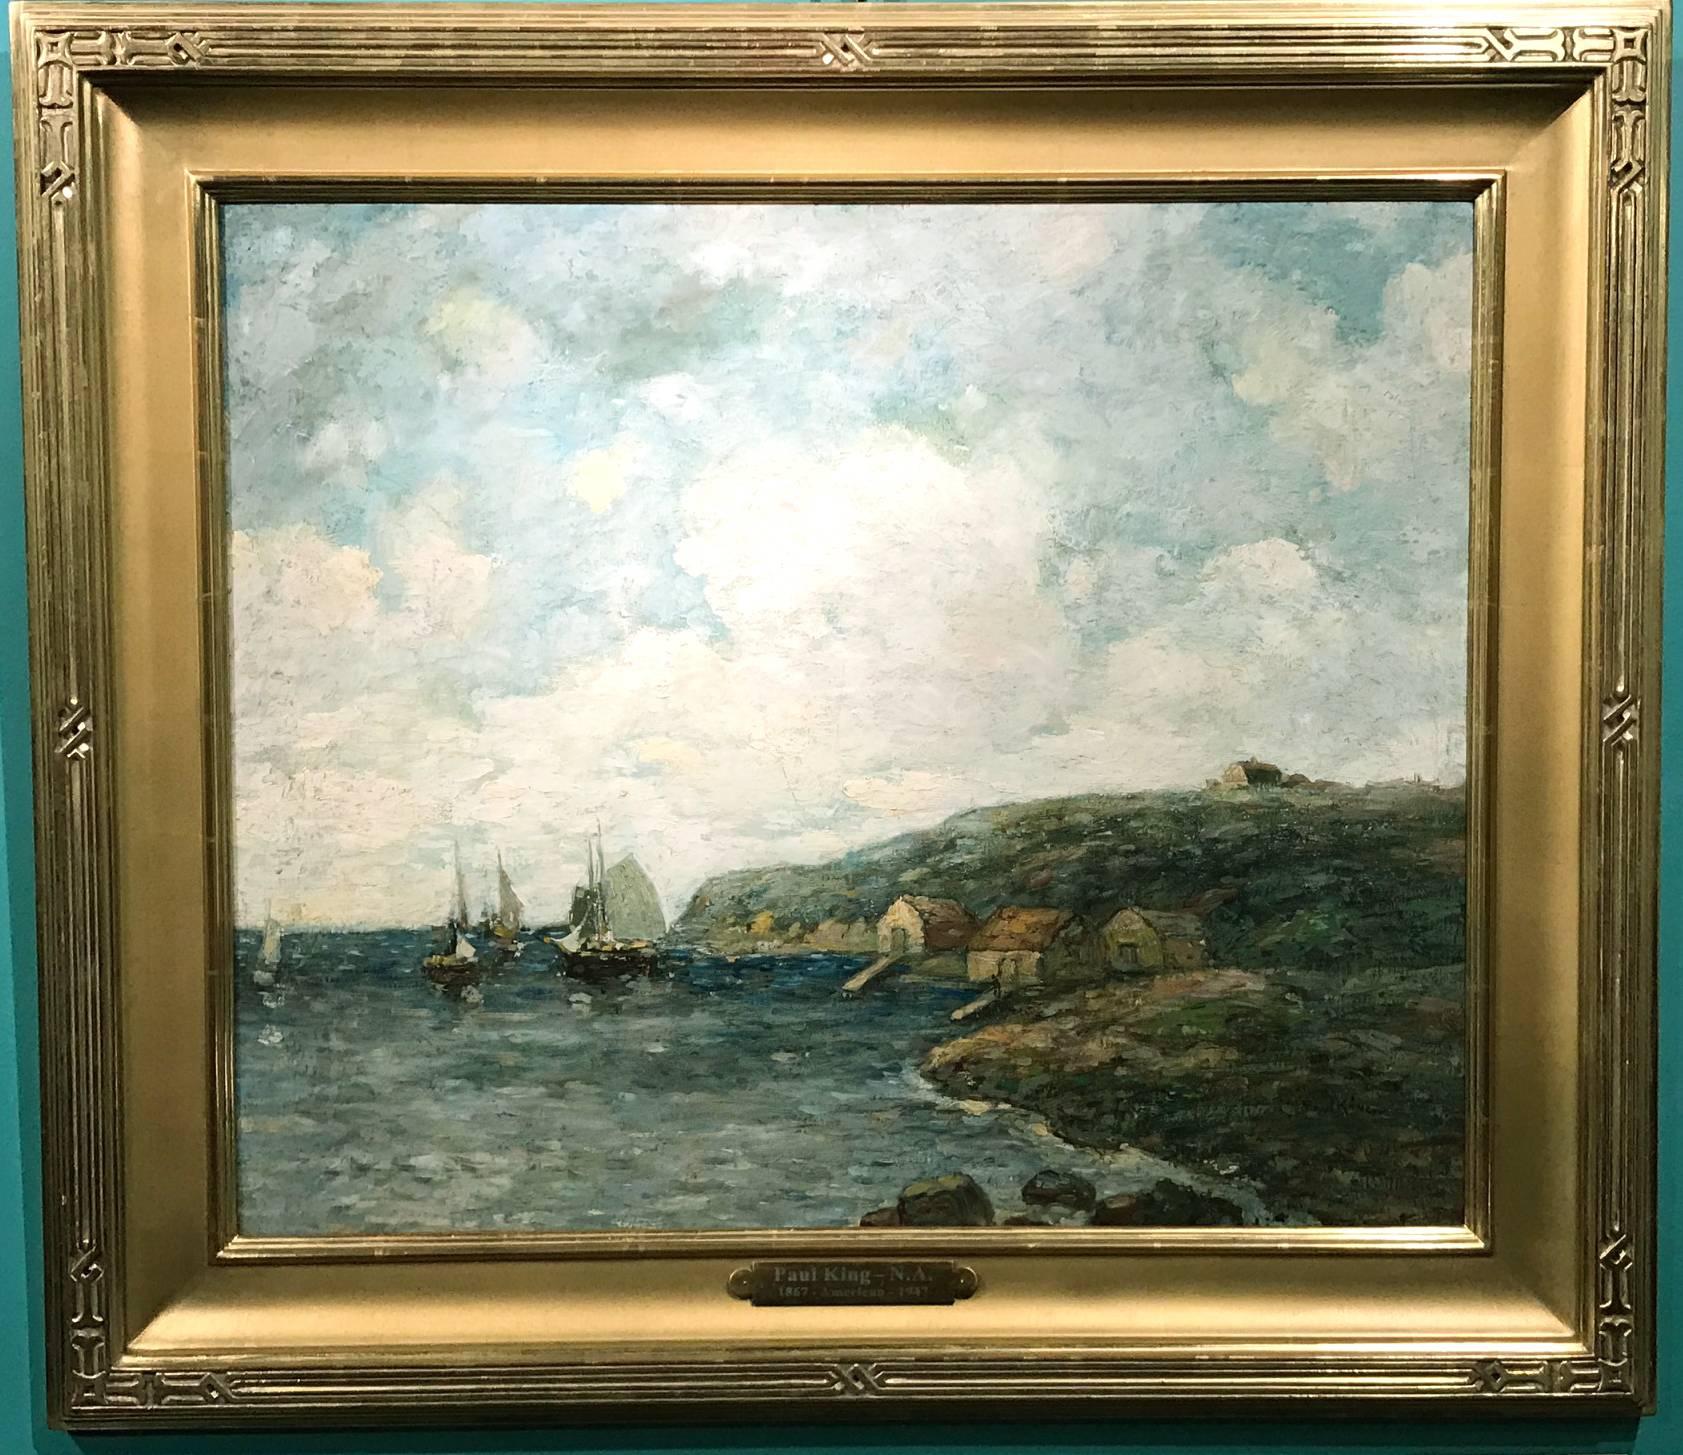 This wonderful impressionist coastal marine painting of a harbor scene was done by American artist Paul Bernard King (1867-1947). King was born in Buffalo, New York, and after becoming an established printer, went on to study at the NY Art Students